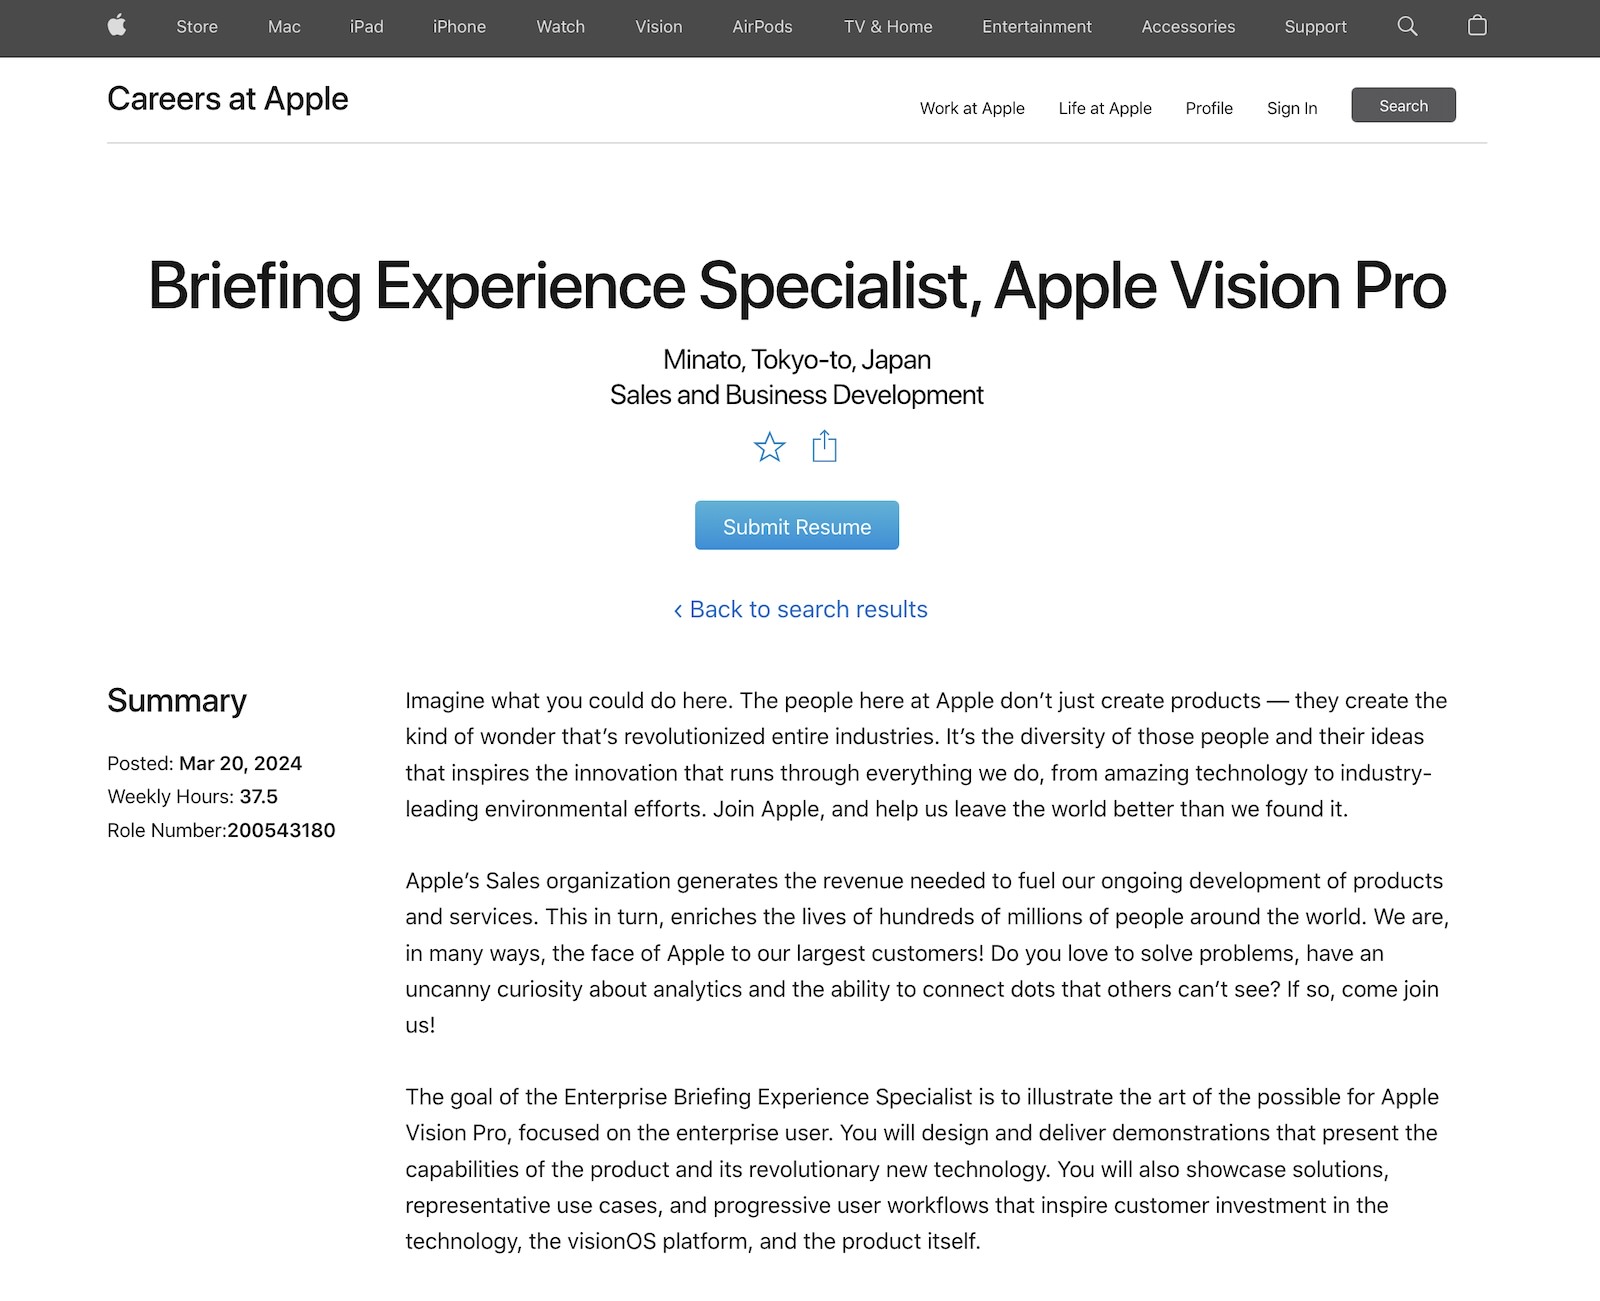 Apple VP Briefing Experience Specialist